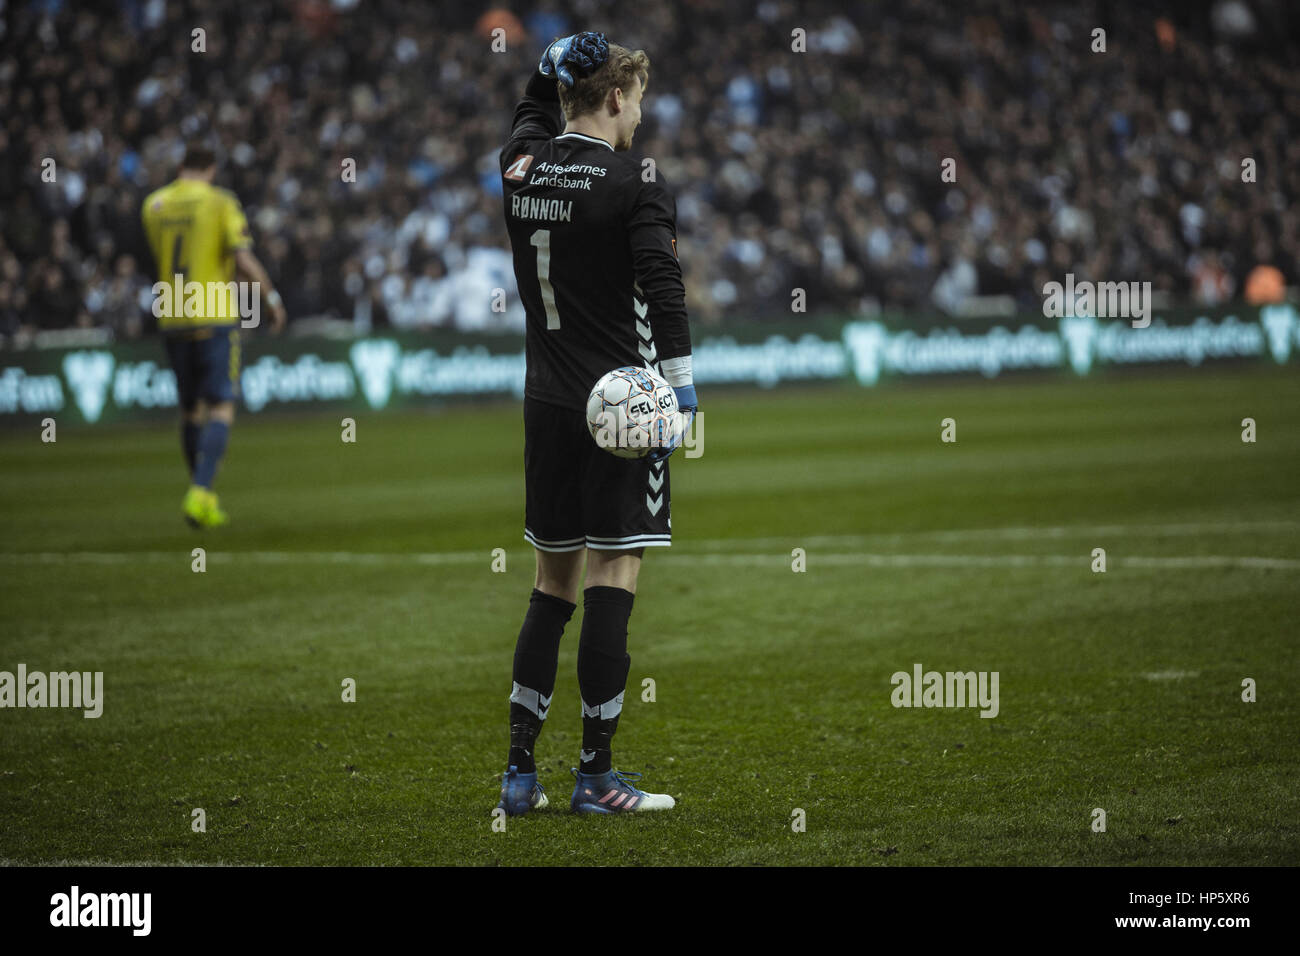 Denmark, Copenhagen, February 19th 2017. Brøndby IF goalkeeper Frederik Rønnow (1) seen during the ALKA Superliga match against the rivals from Brøndby IF at Telia Parken. The match ended 0-0 and is known as the New Firm derby. Stock Photo